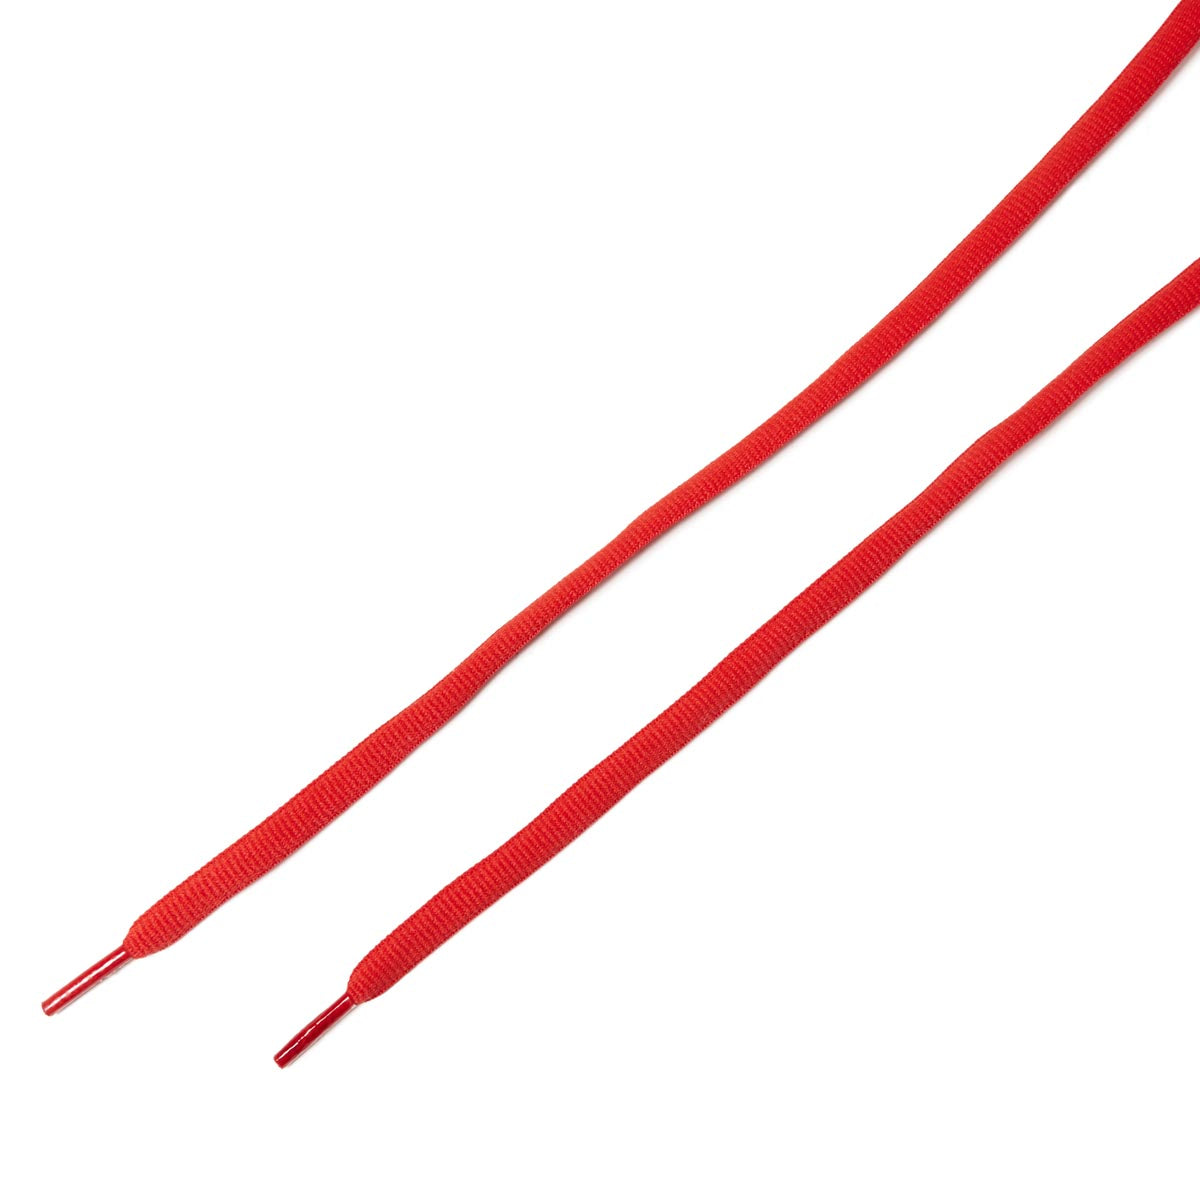 CCS Oval Shoelaces - Red image 2